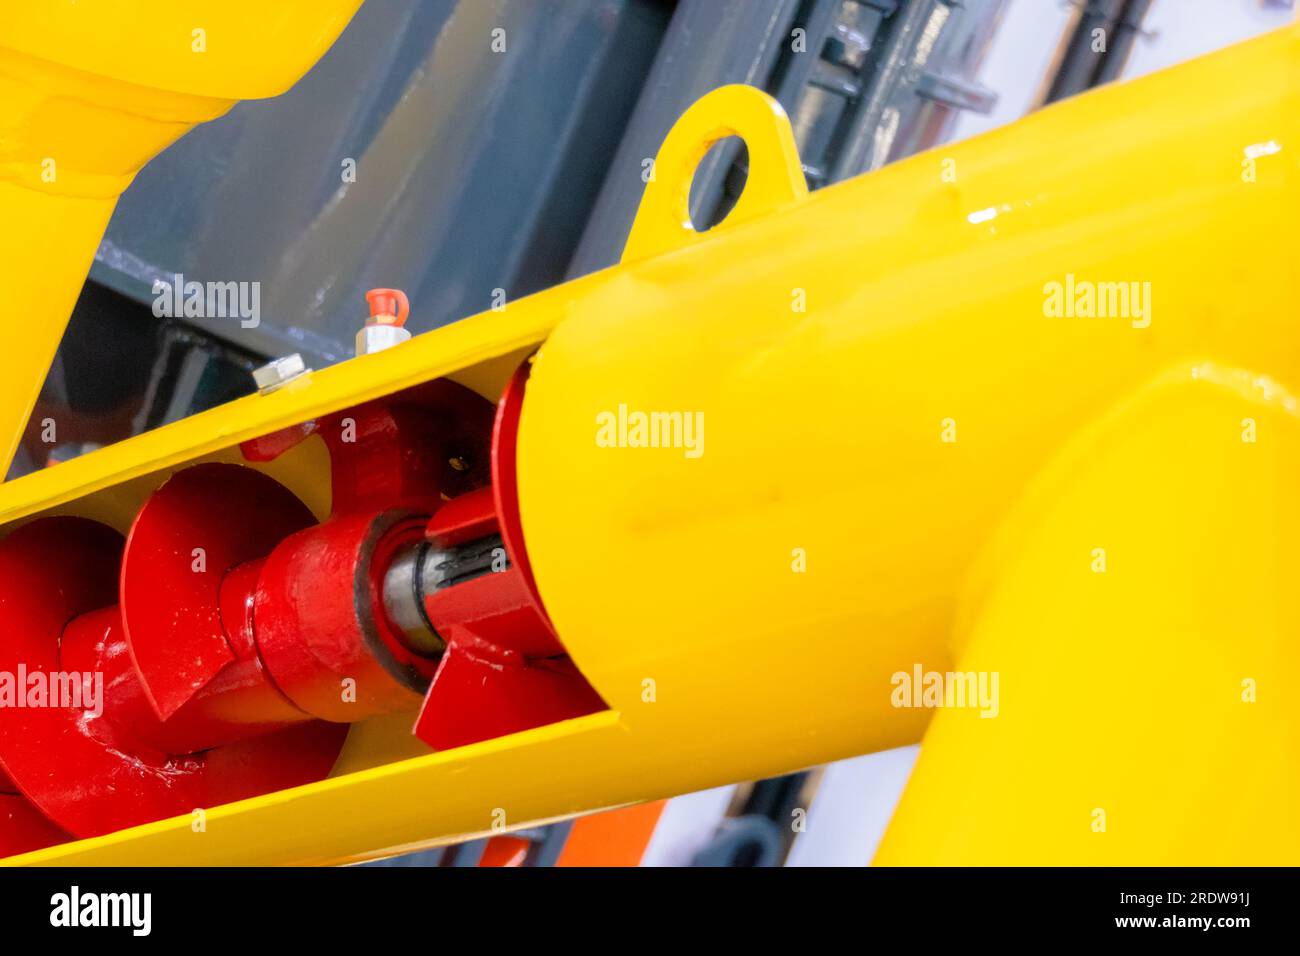 Drilling equipment for drilling wells Stock Photo